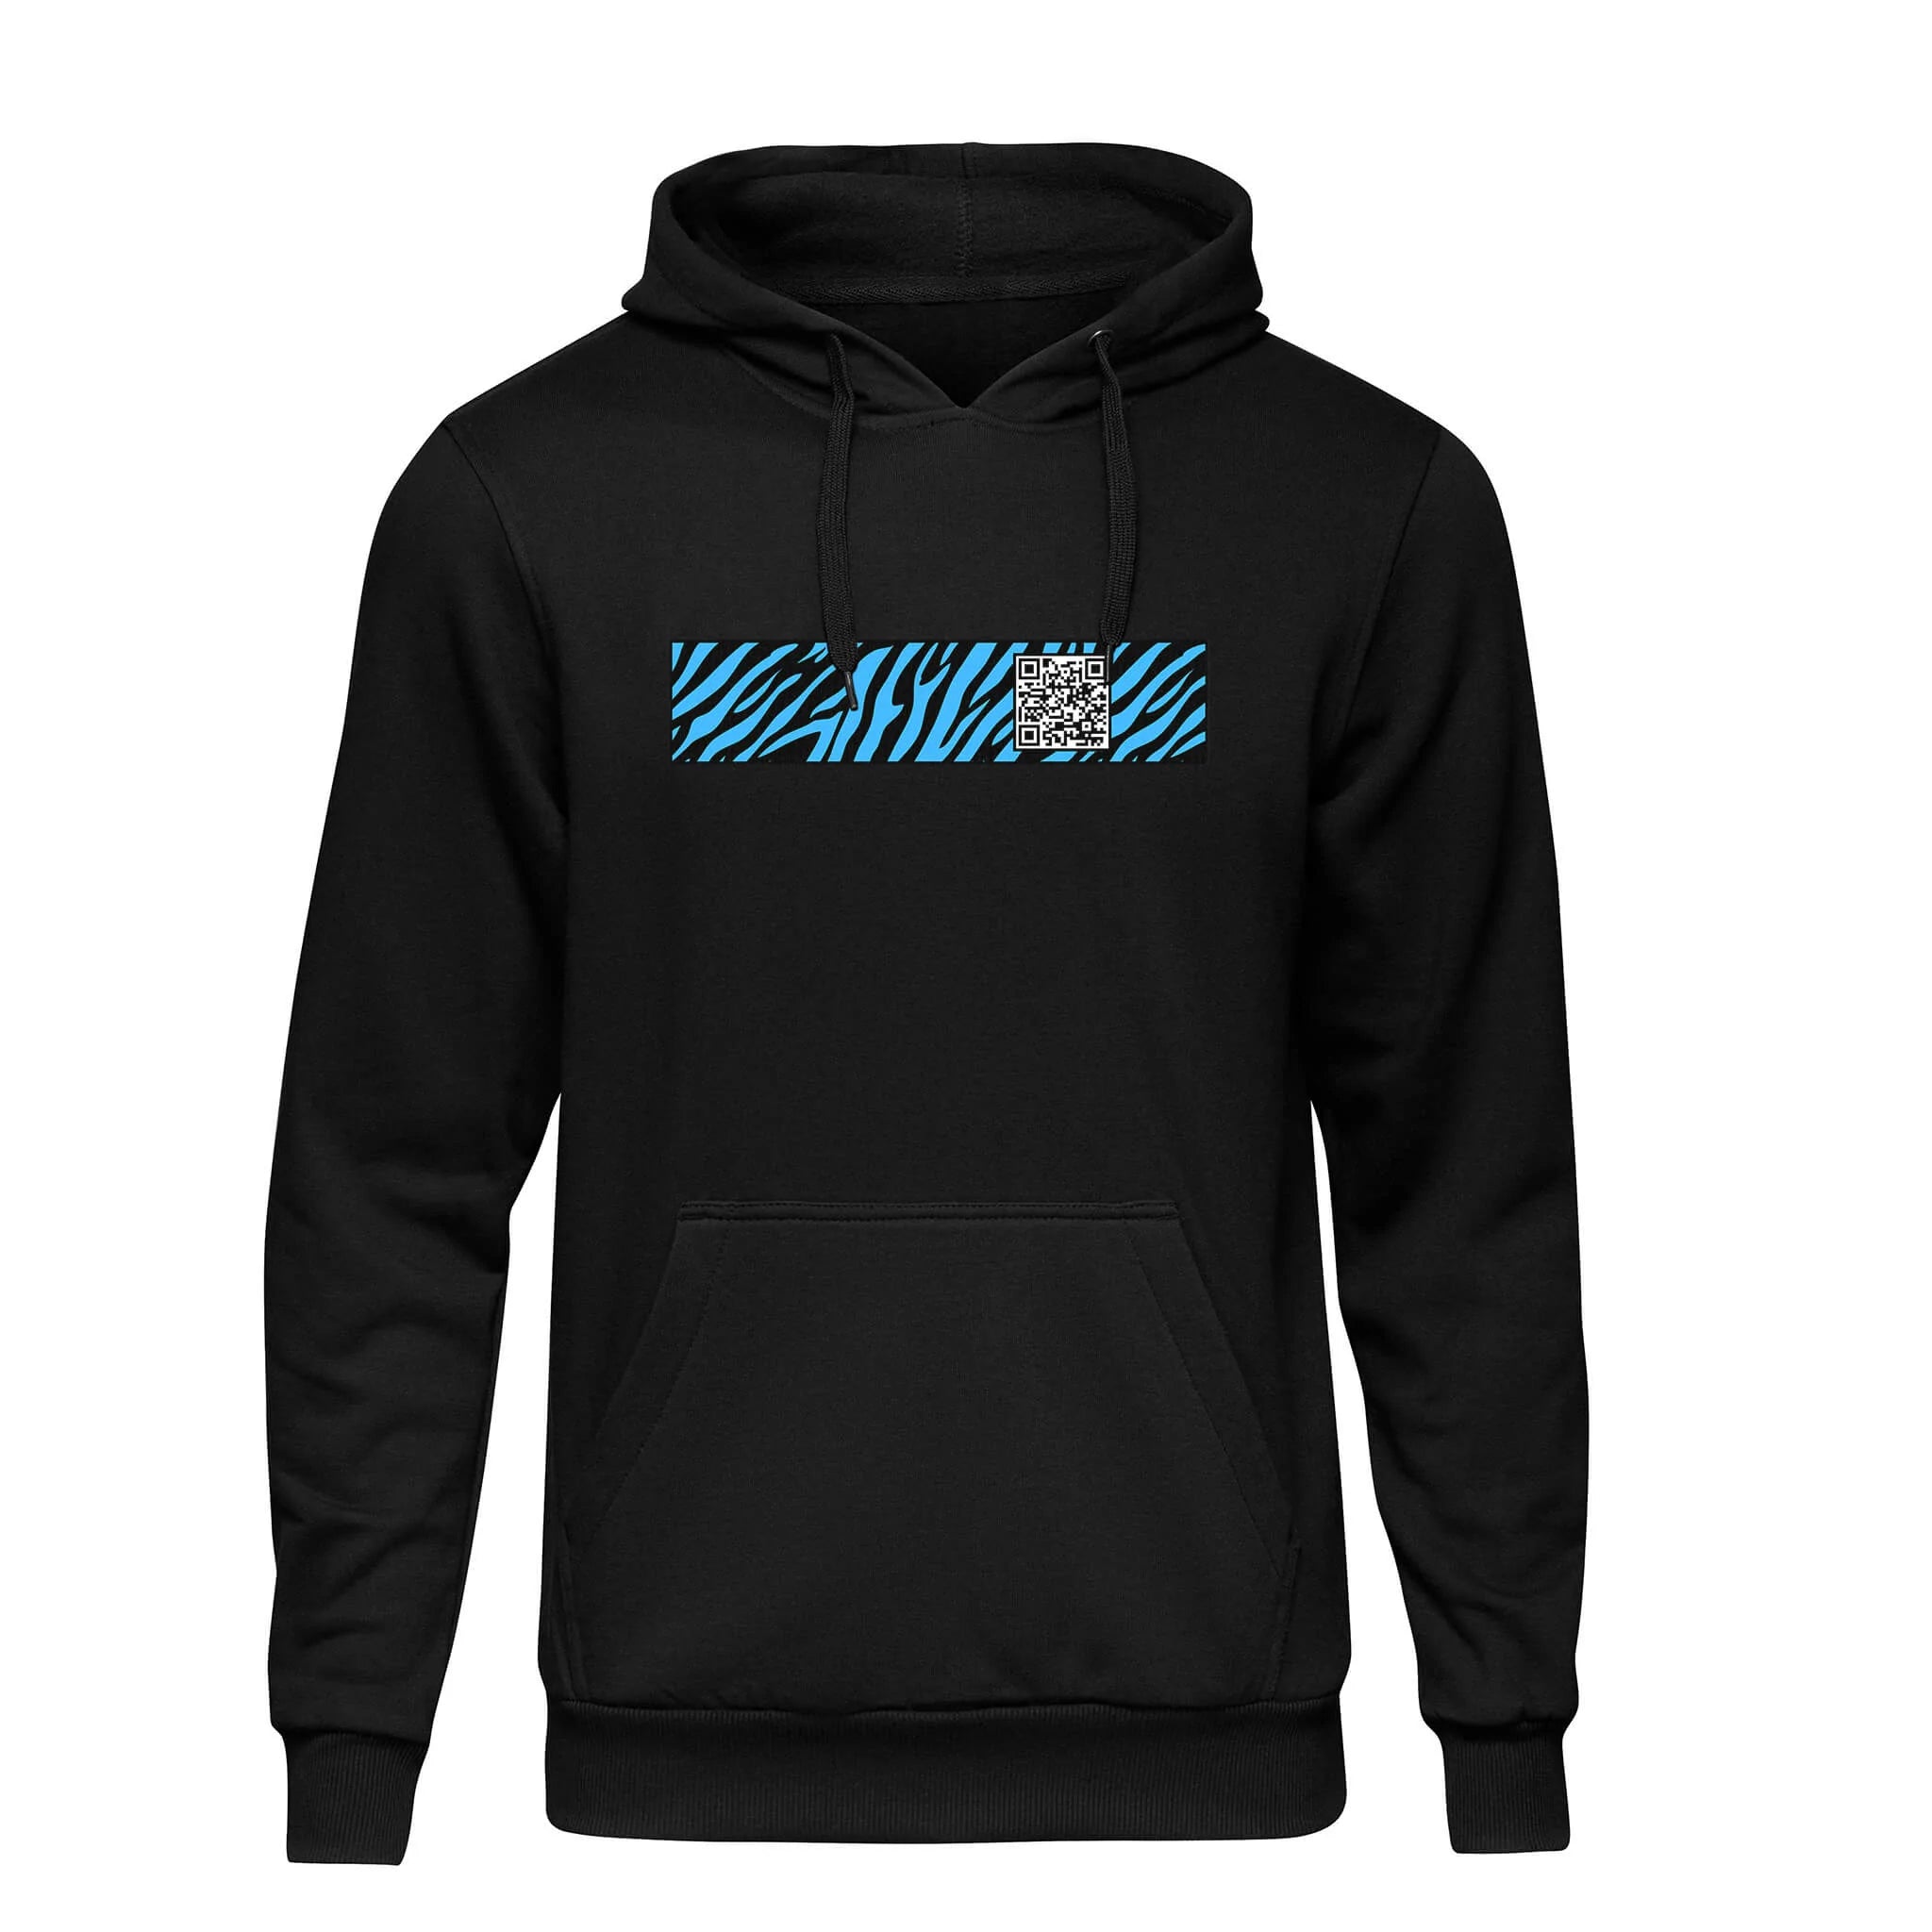 Black QR Hoodie from RESHRD Stripe collection with Front Black & Light Blue design